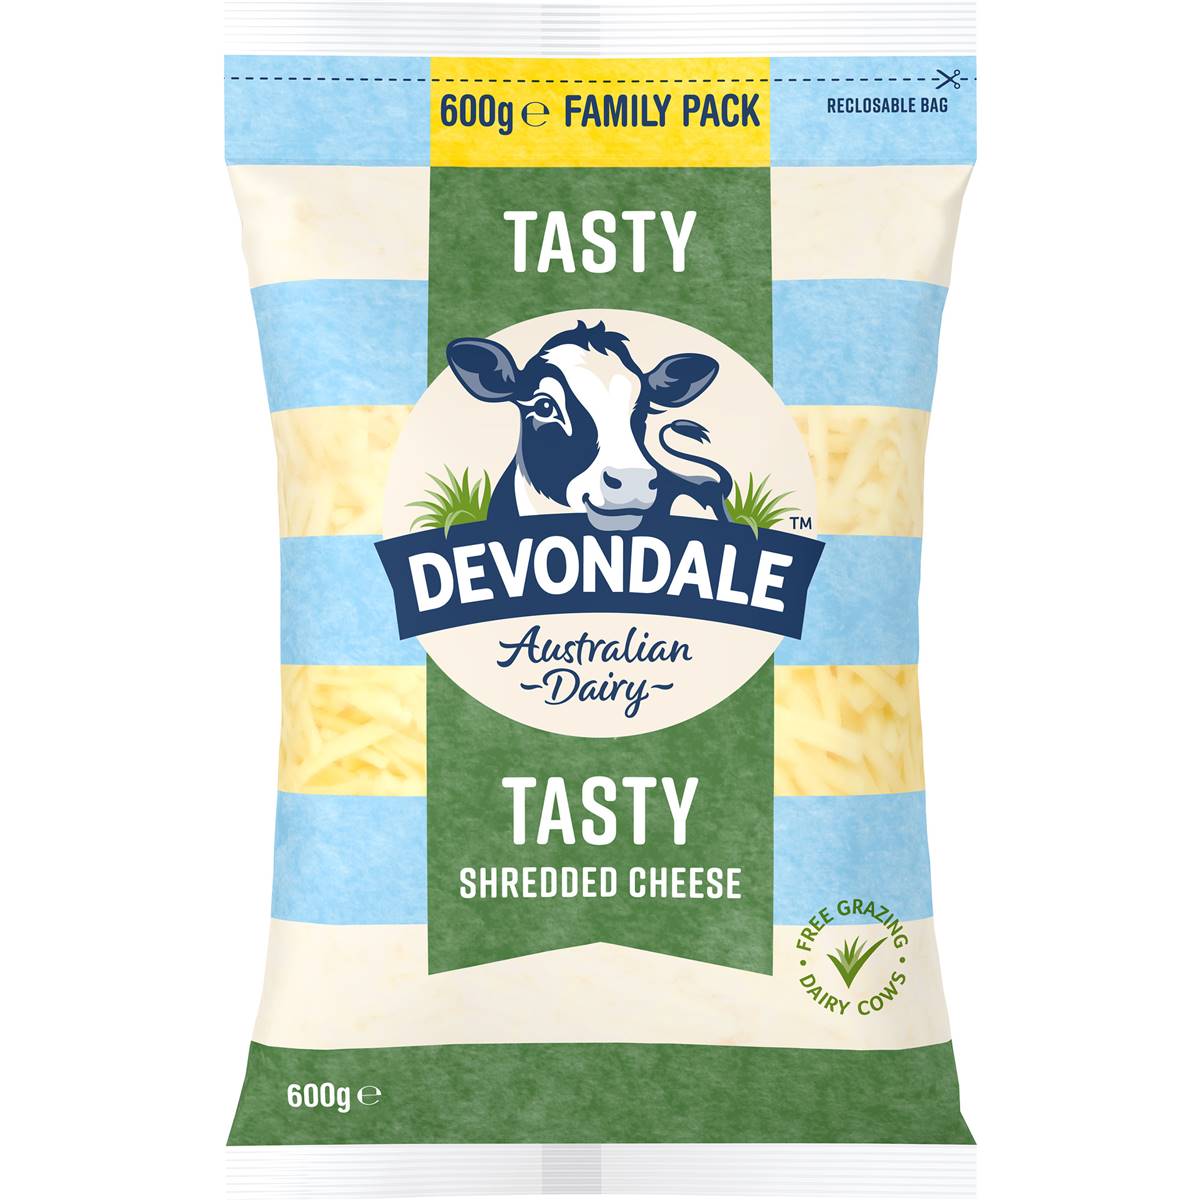 Calories in Devondale Shredded Tasty Grated Cheese